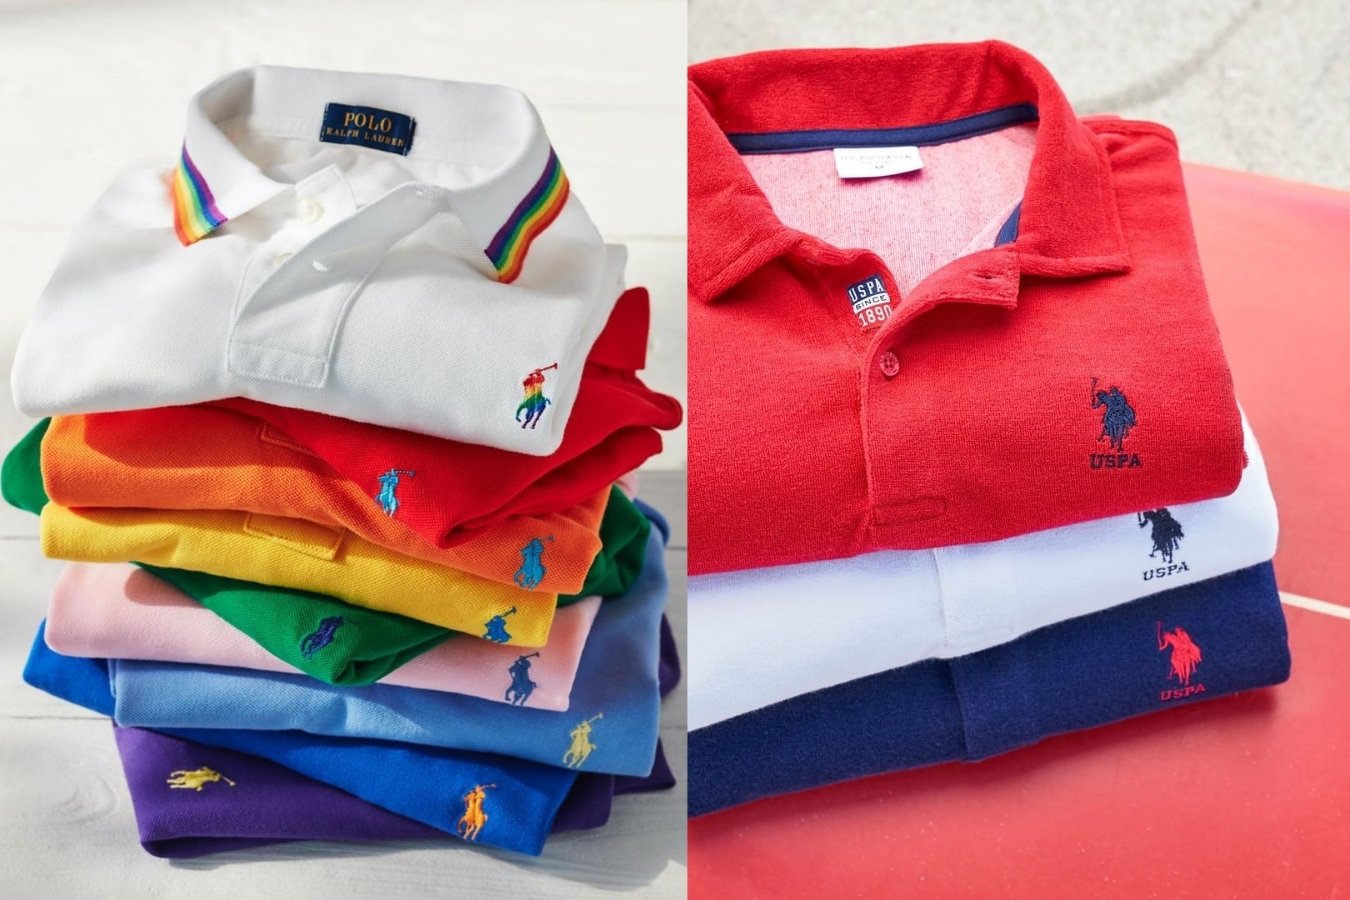 polo assn and ralph lauren difference,Save up to 16%,www.ilcascinone.com